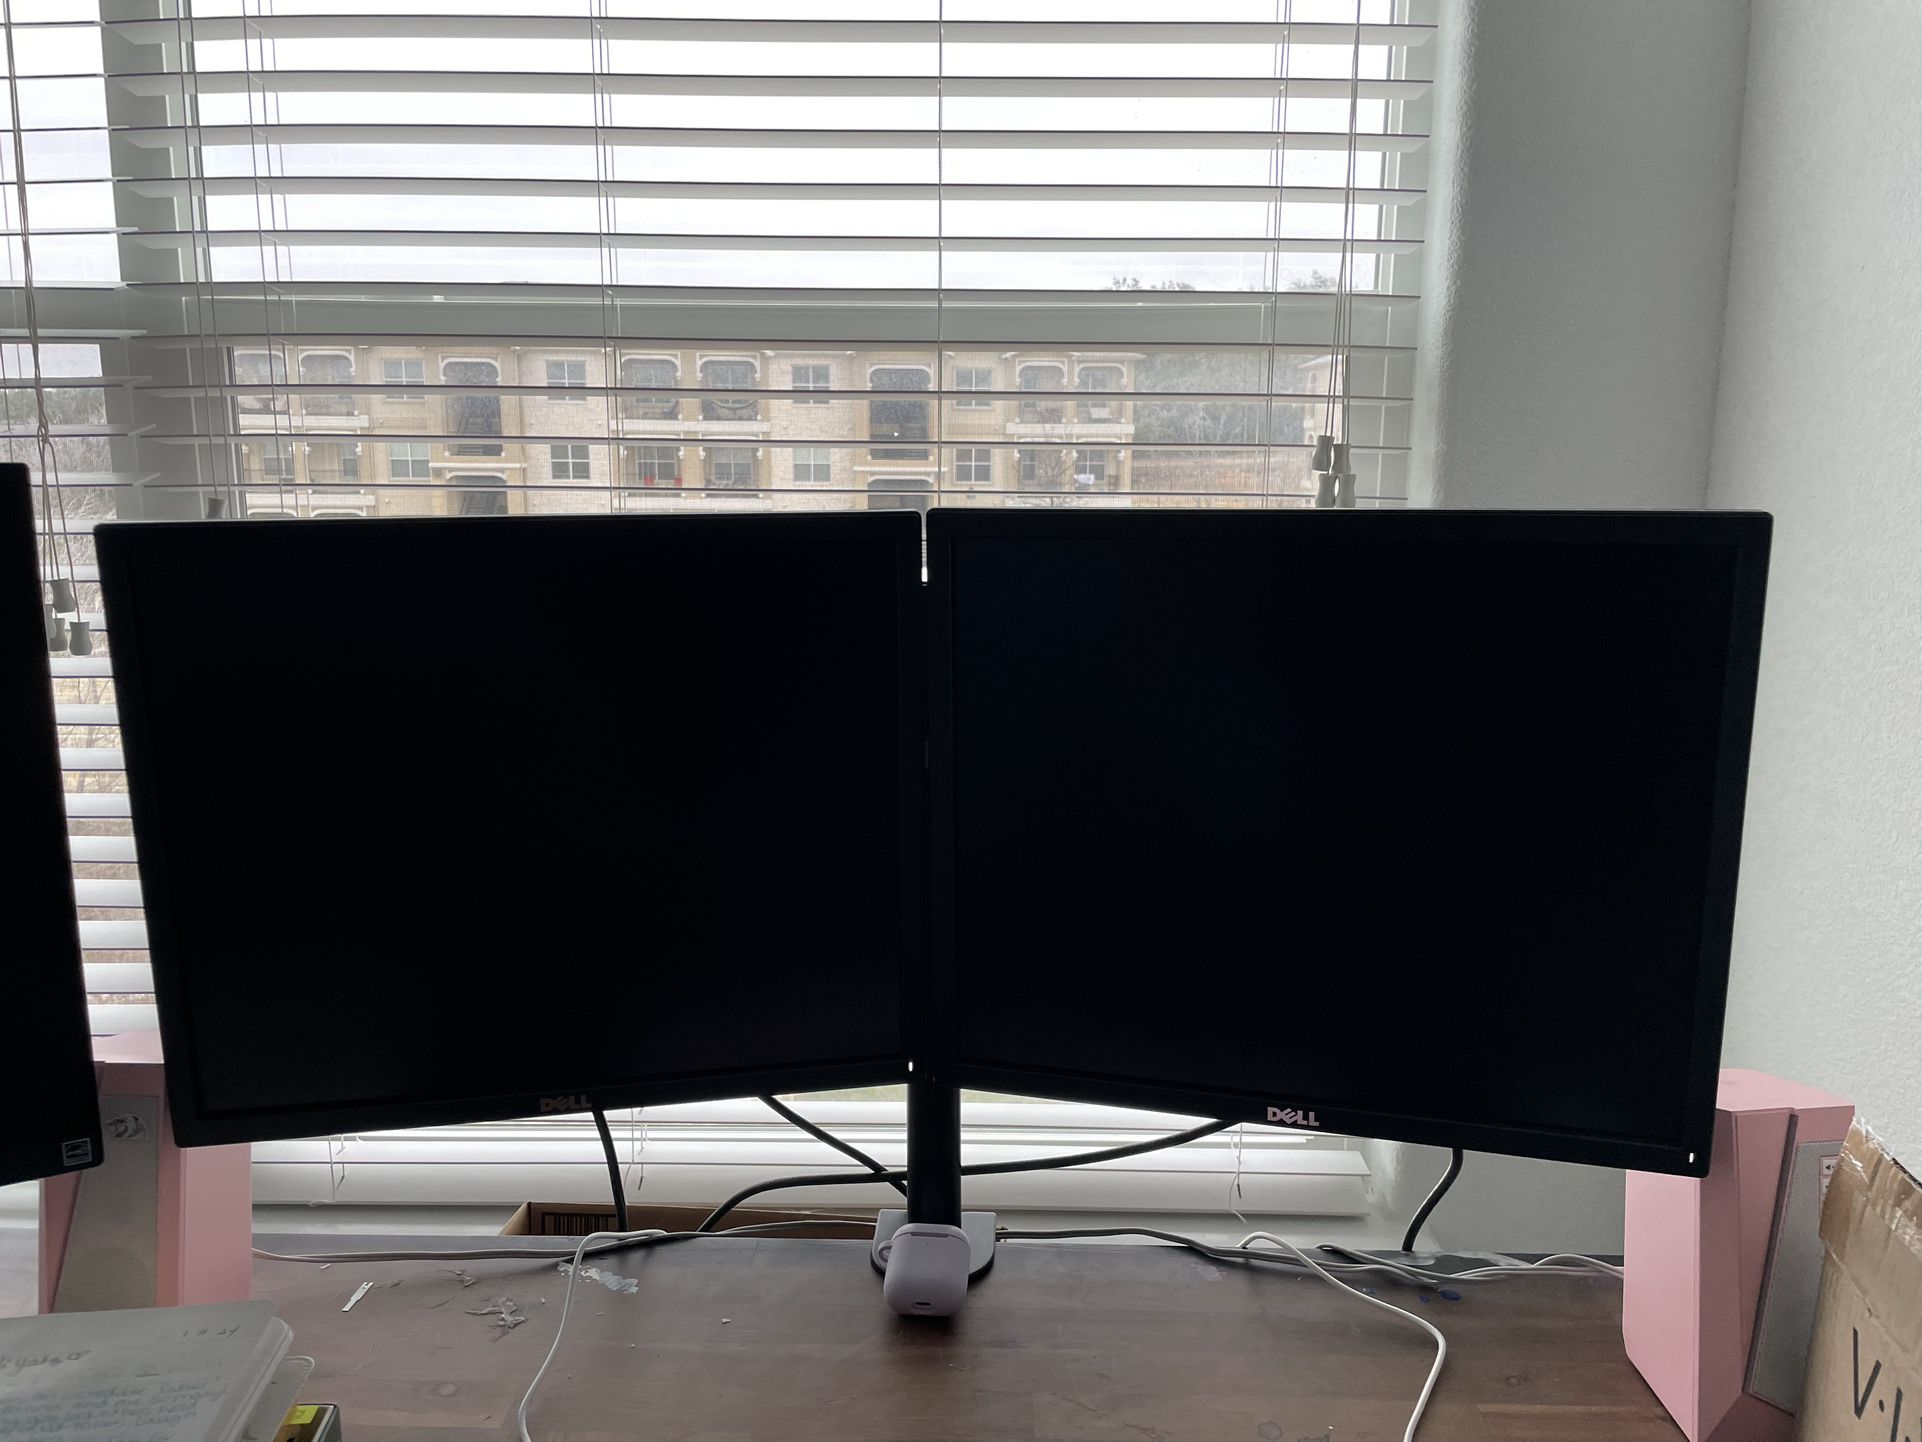 2 Dell Monitors With Dual Monitor Mount 